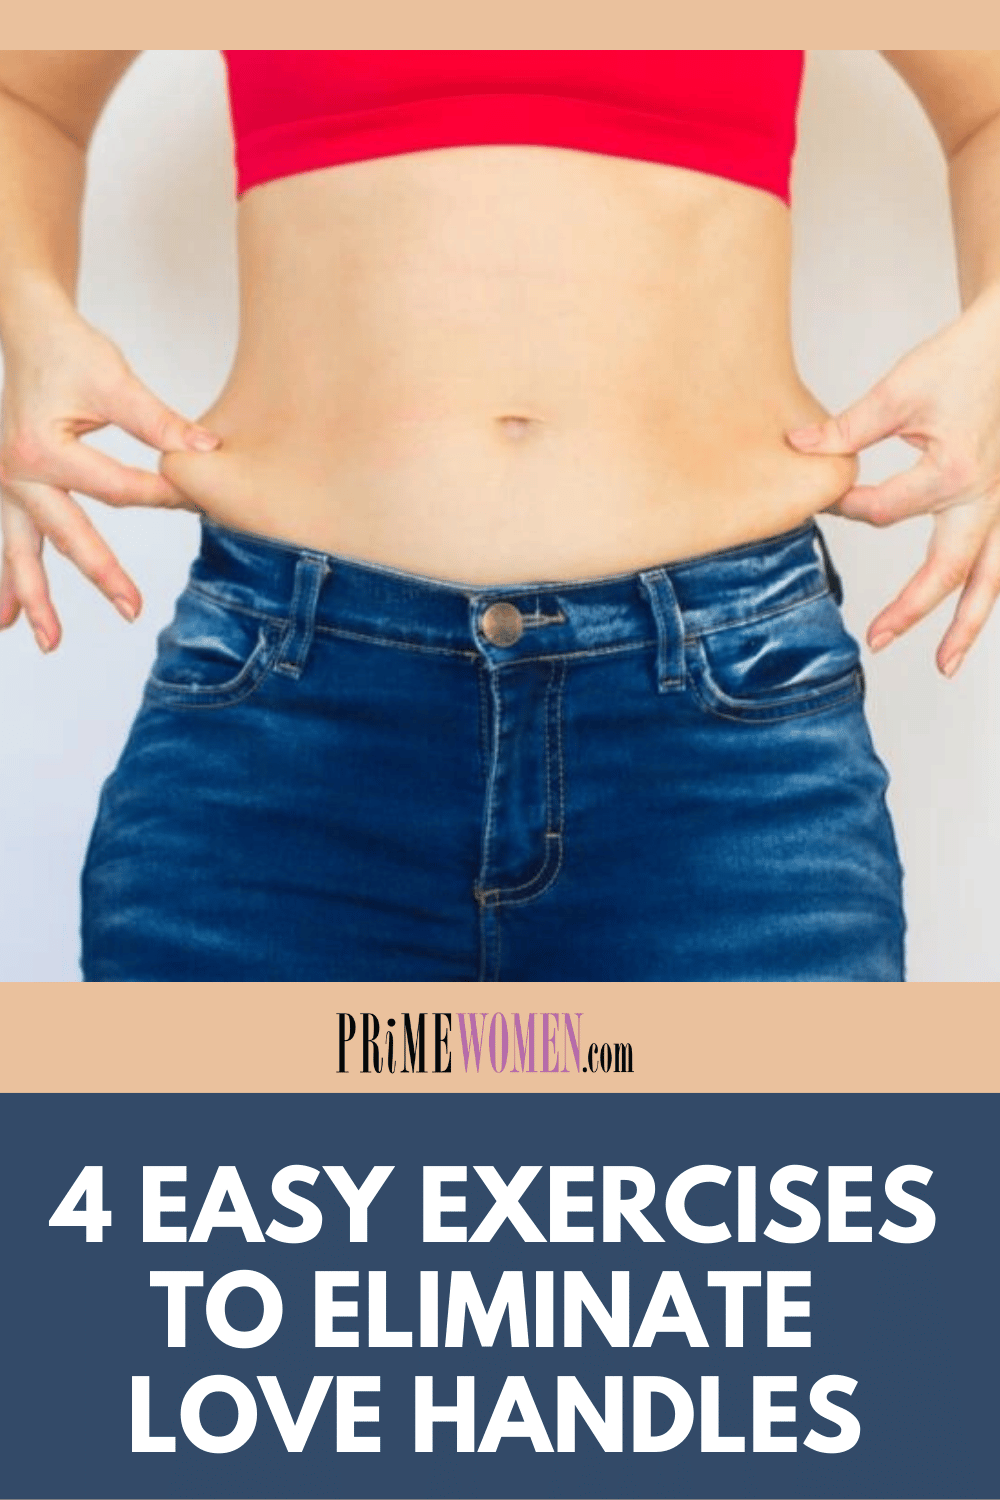 4 Easy Exercises to Eliminate Love Handles